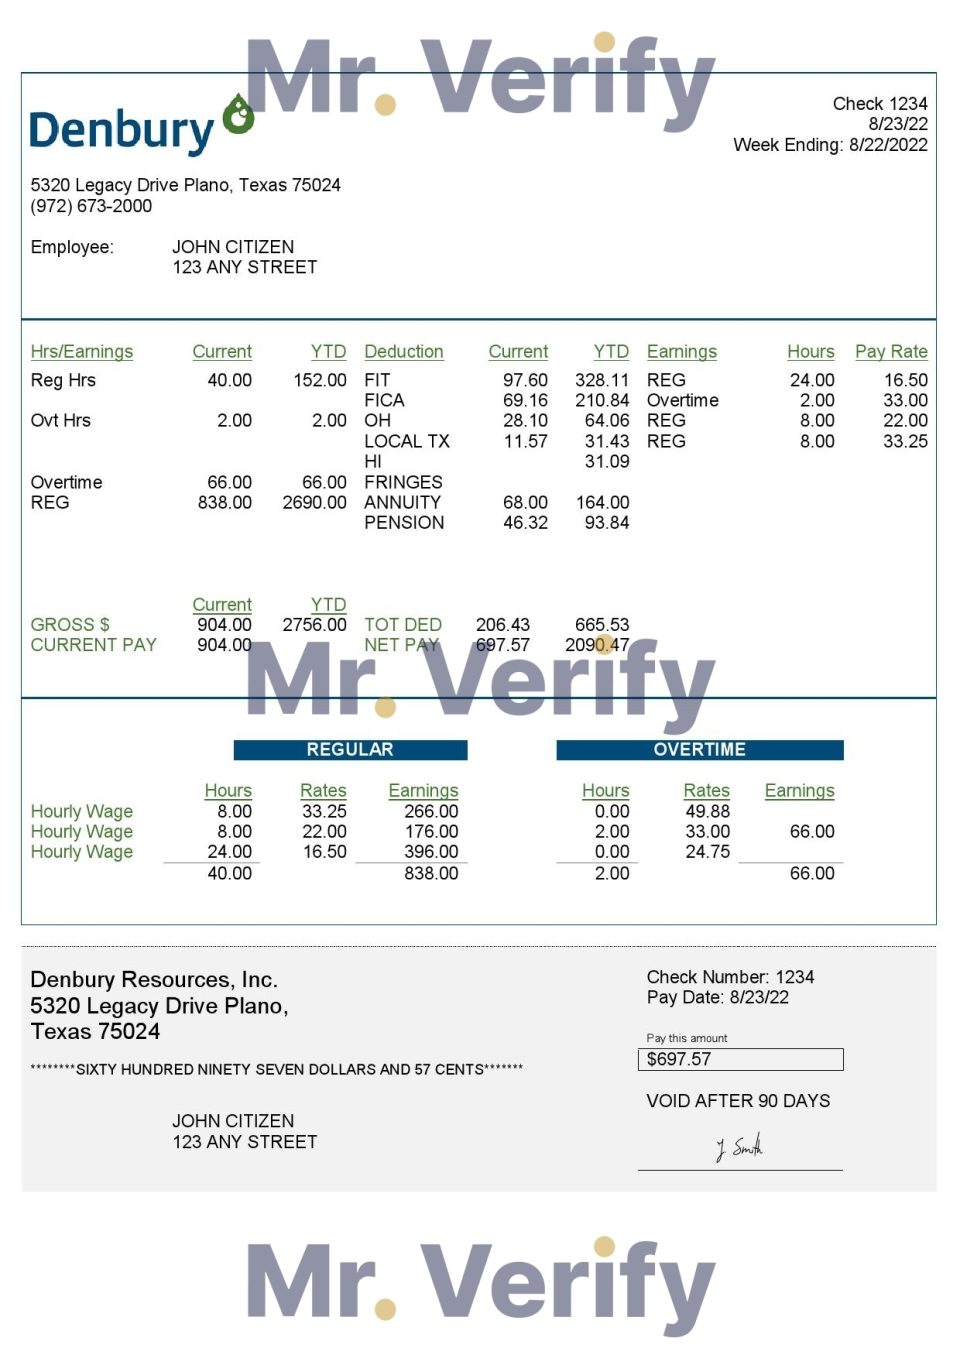 USA Denbury Resources Inc. oil & gas company pay stub Word and PDF template